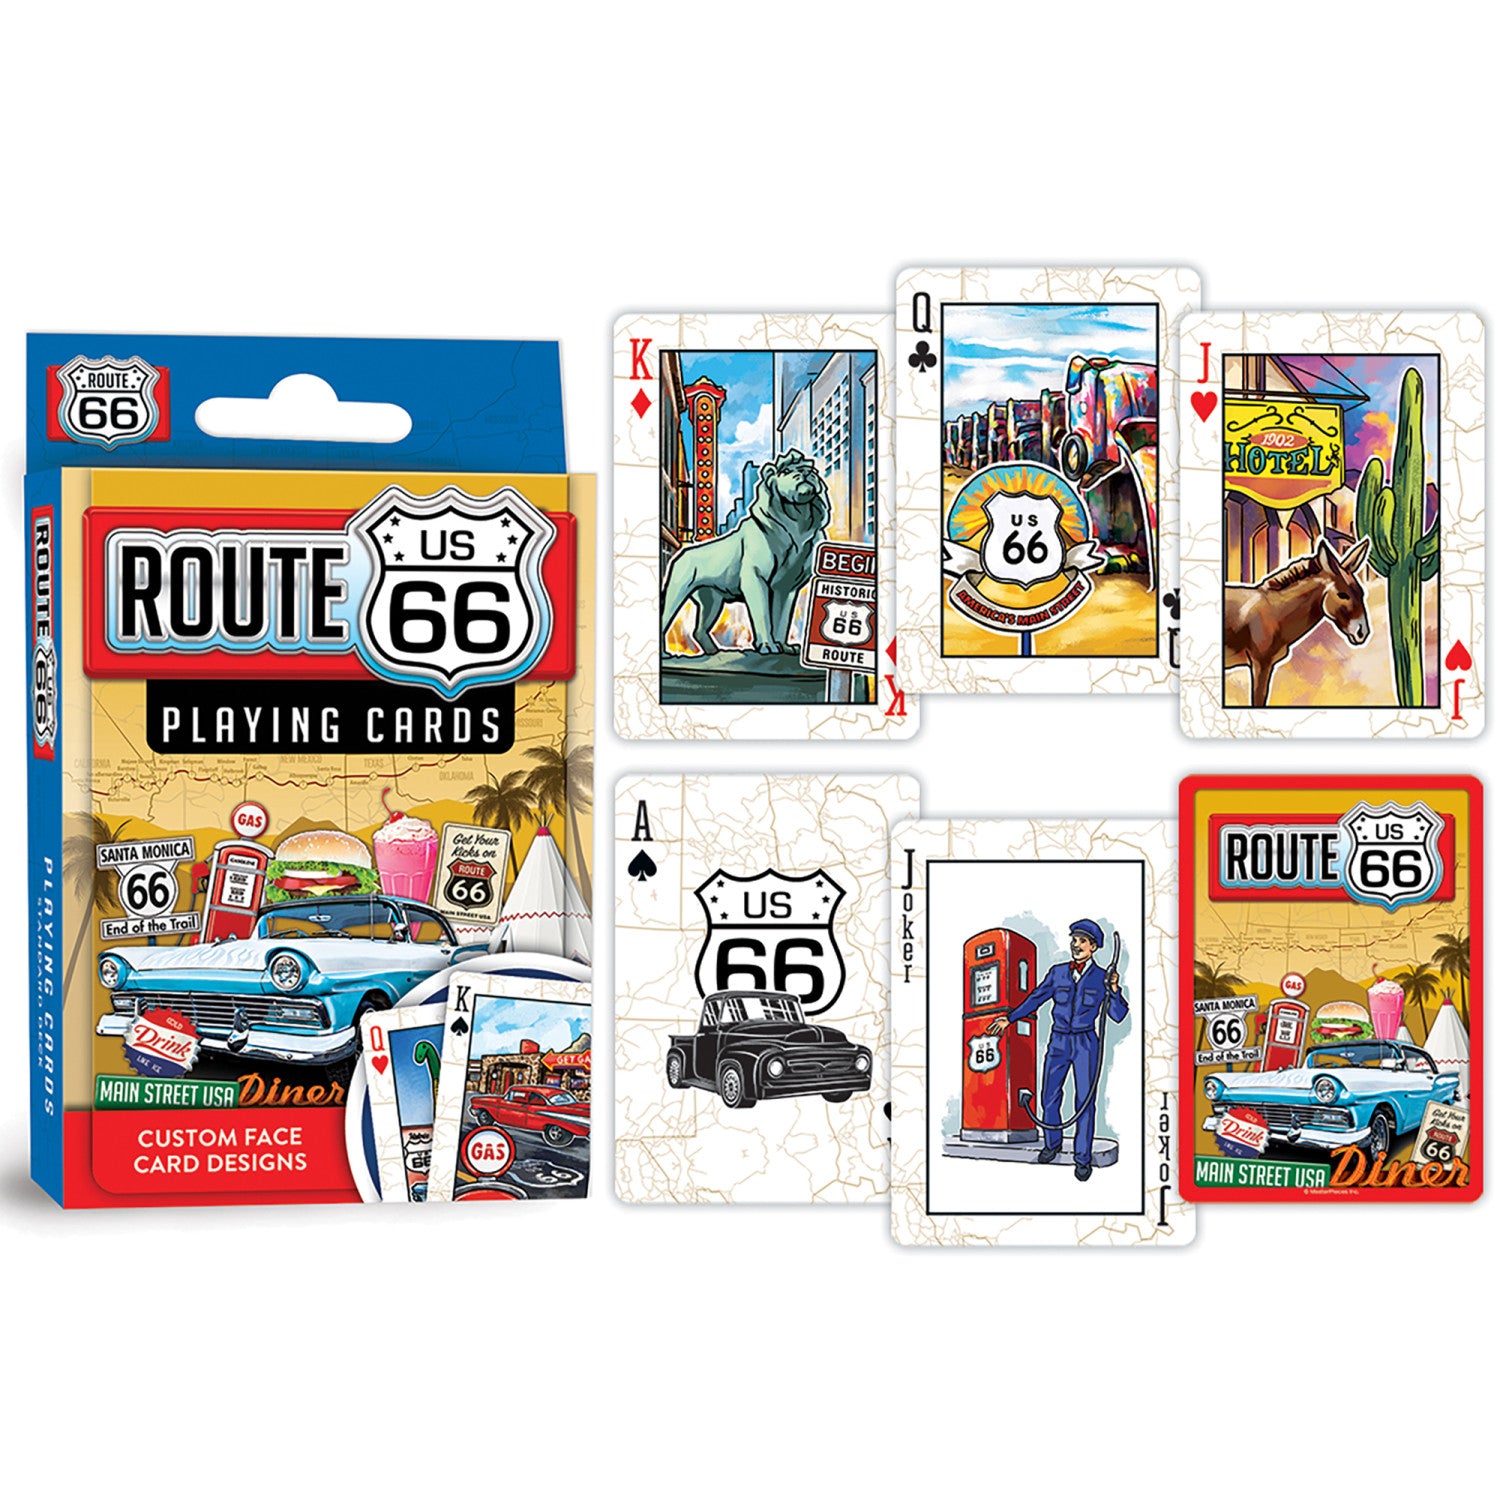 Route 66 Playing Cards - 54 Card Deck